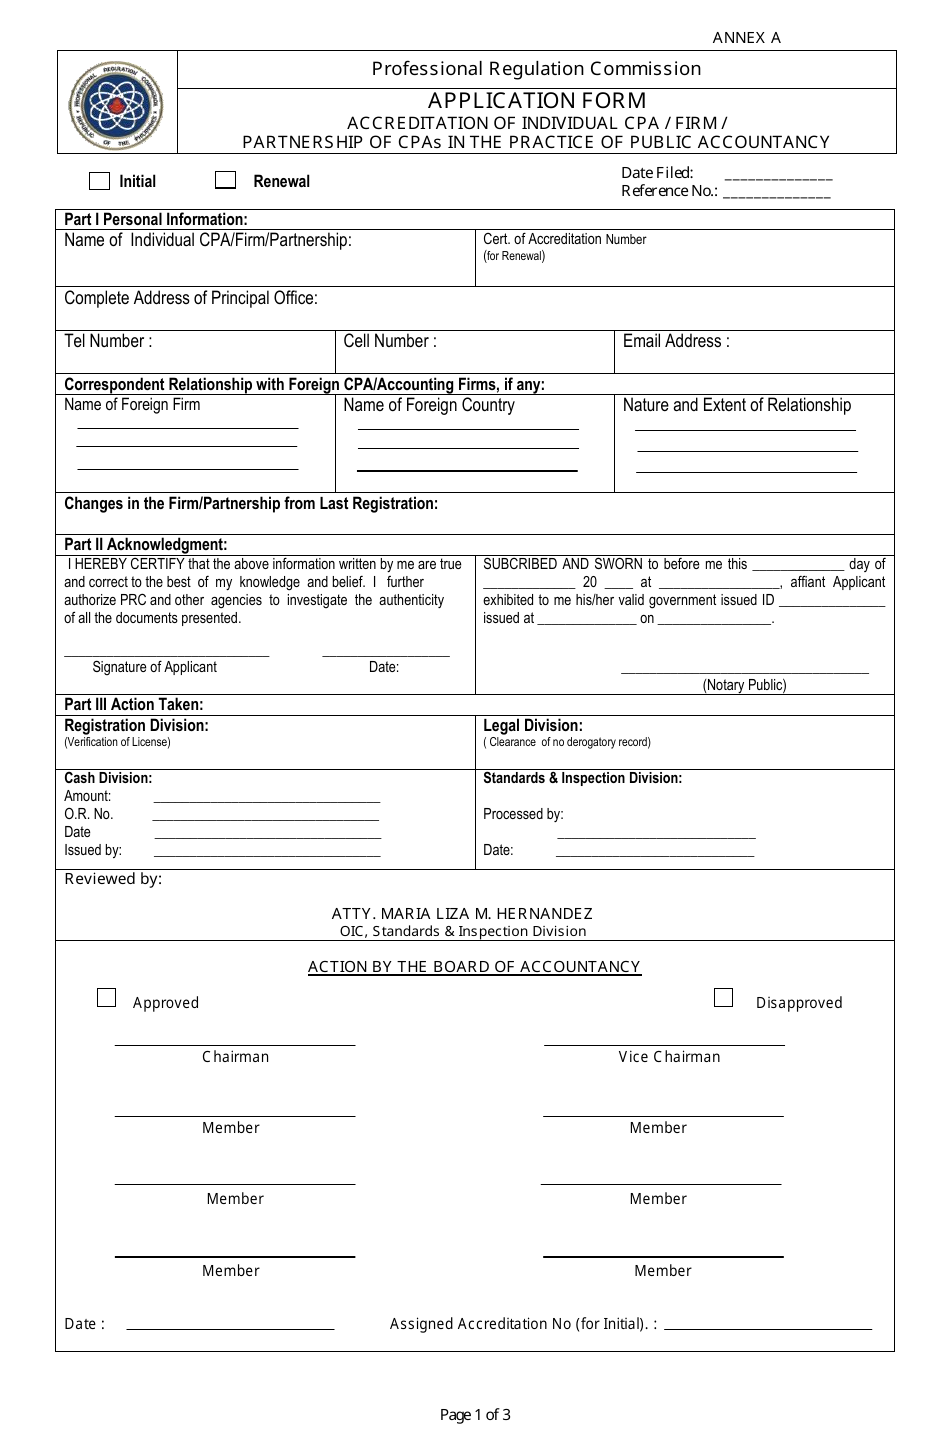 Annex A Application Form - Accreditation of Individual CPA / Firm / Partnership of Cpas in the Practice of Public Accountancy - Philippines, Page 1